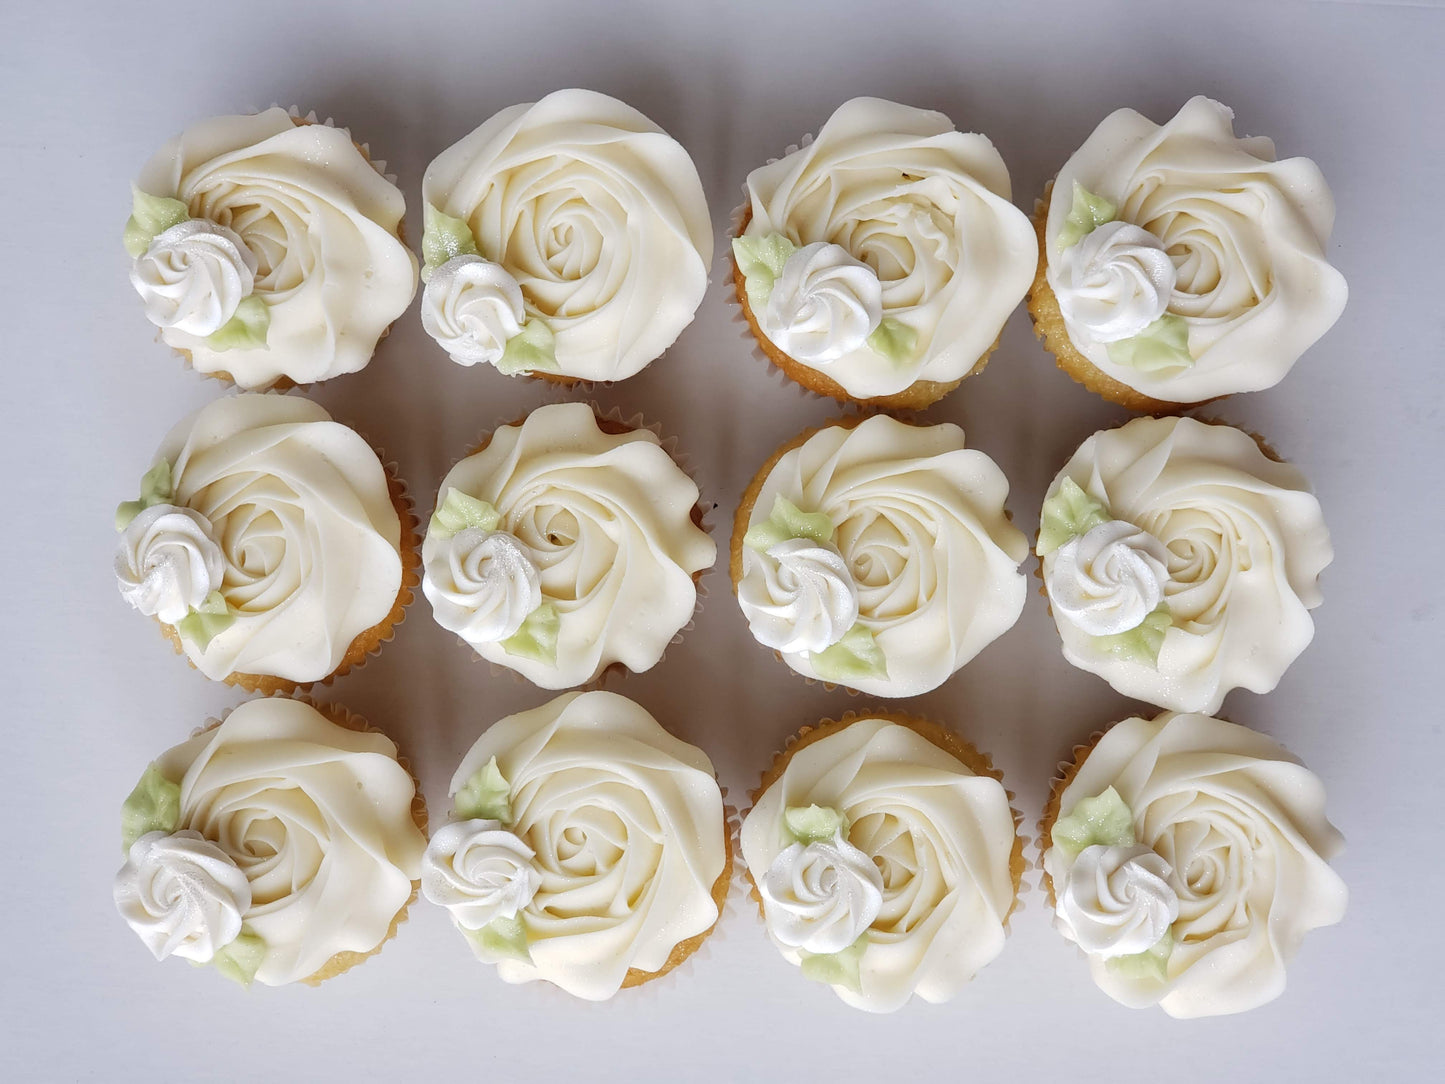 Mini Cupcakes with Roses!